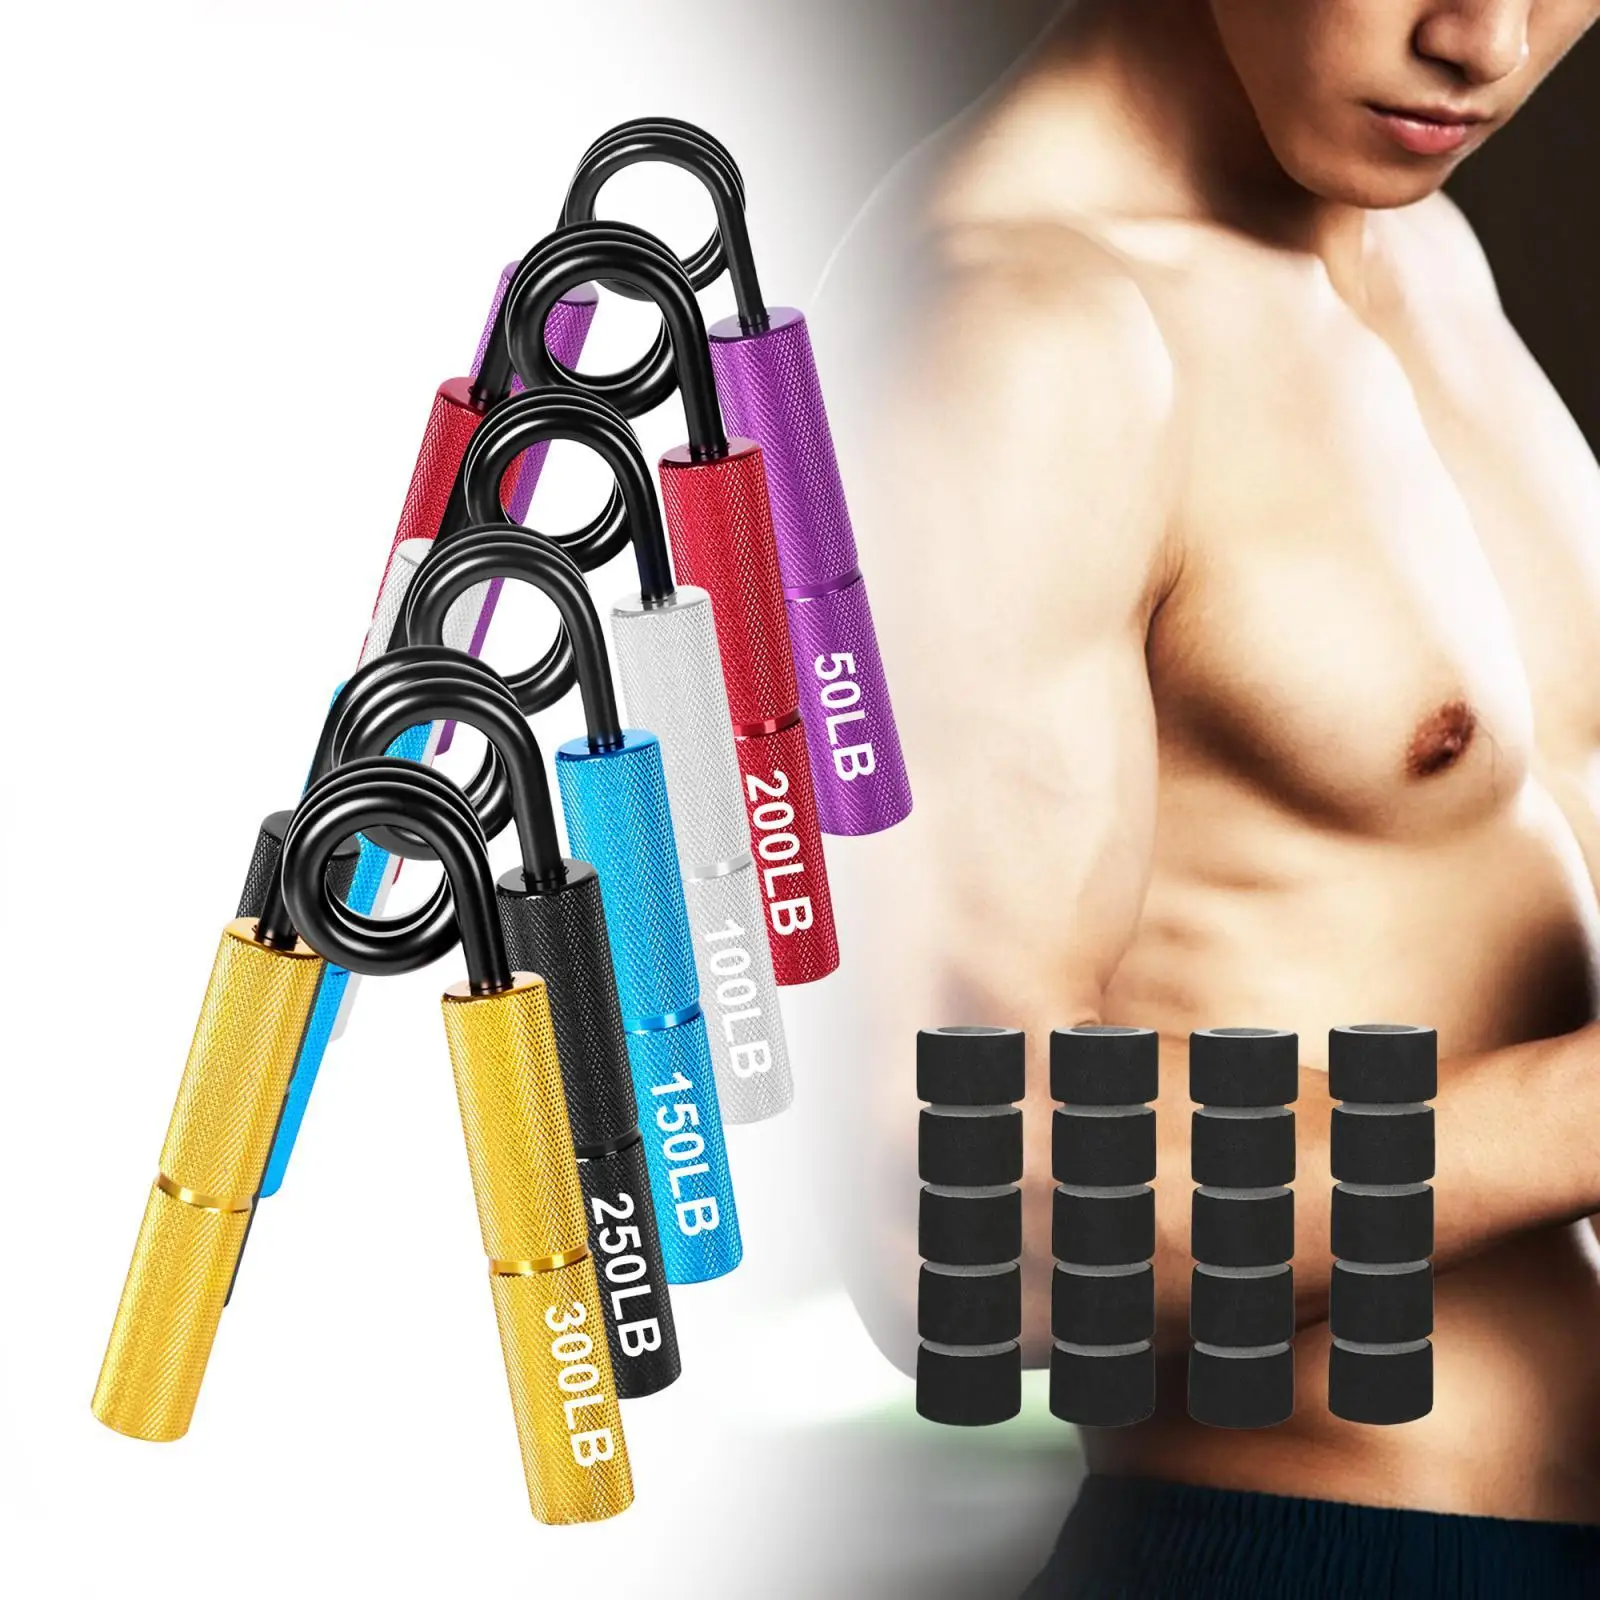 6Pcs Hand Grip Strengthener Training Hand Exerciser Grip Strength Trainer Forearm Exerciser for Seniors Muscle Building Workout